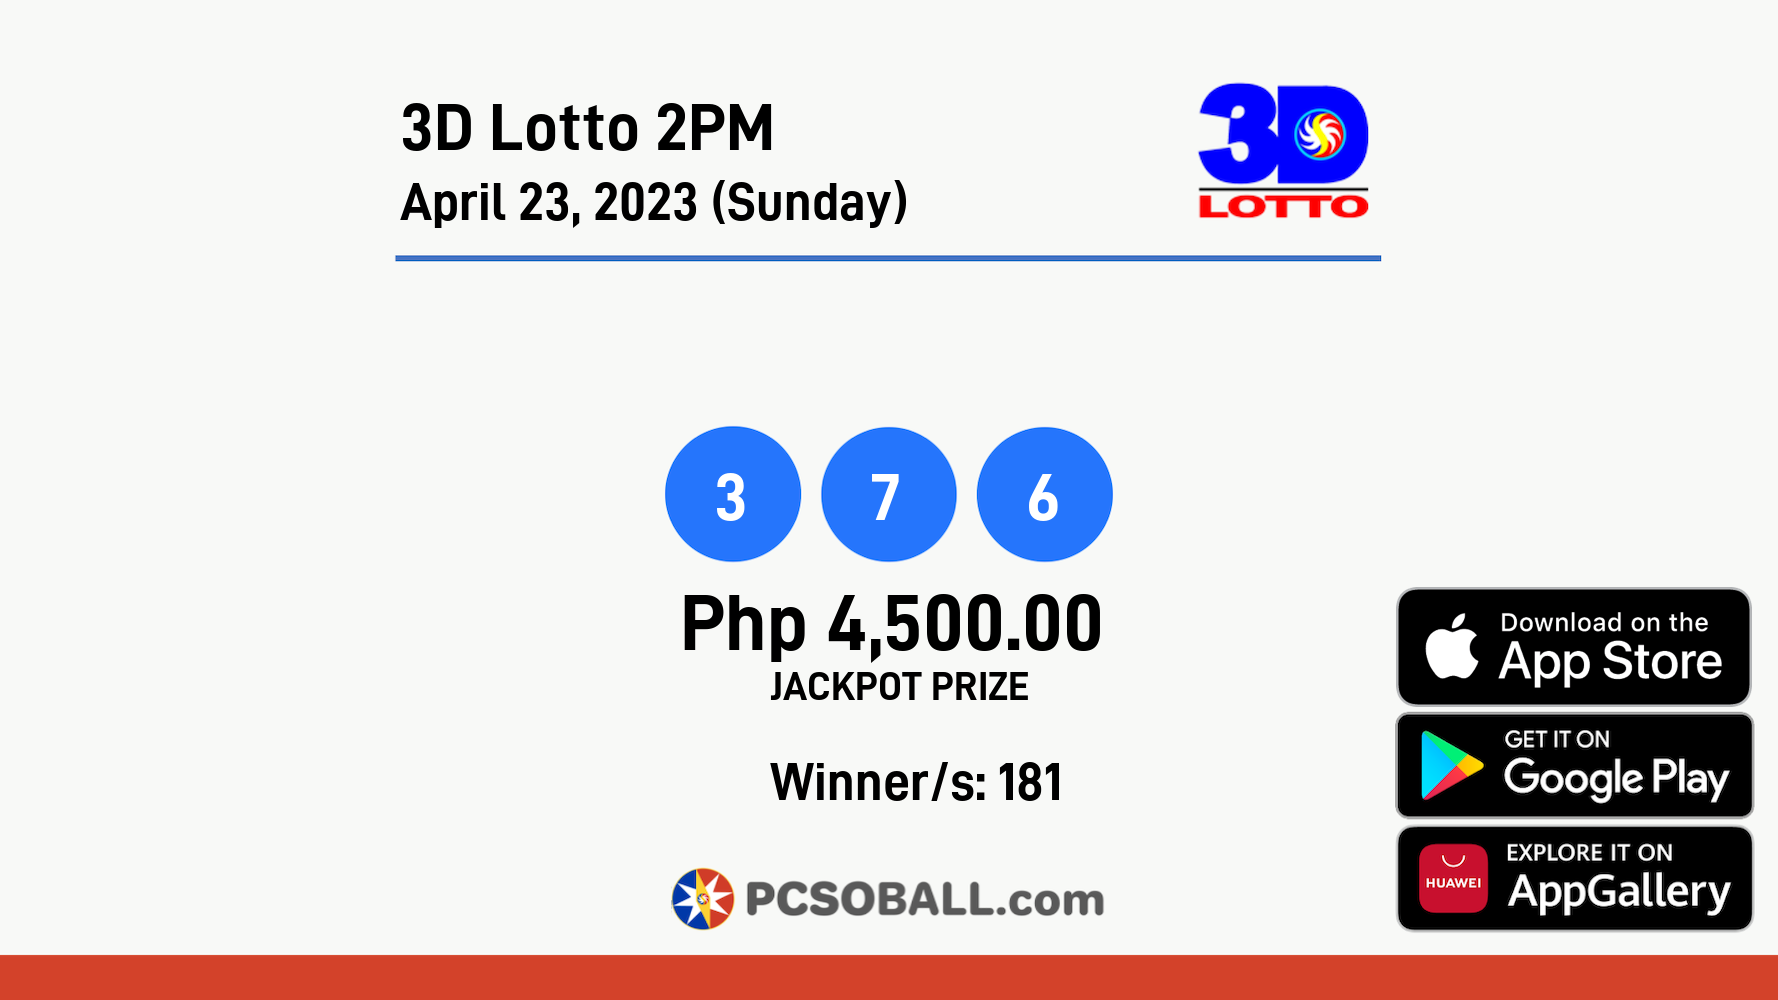 3D Lotto 2PM April 23, 2023 (Sunday) Result